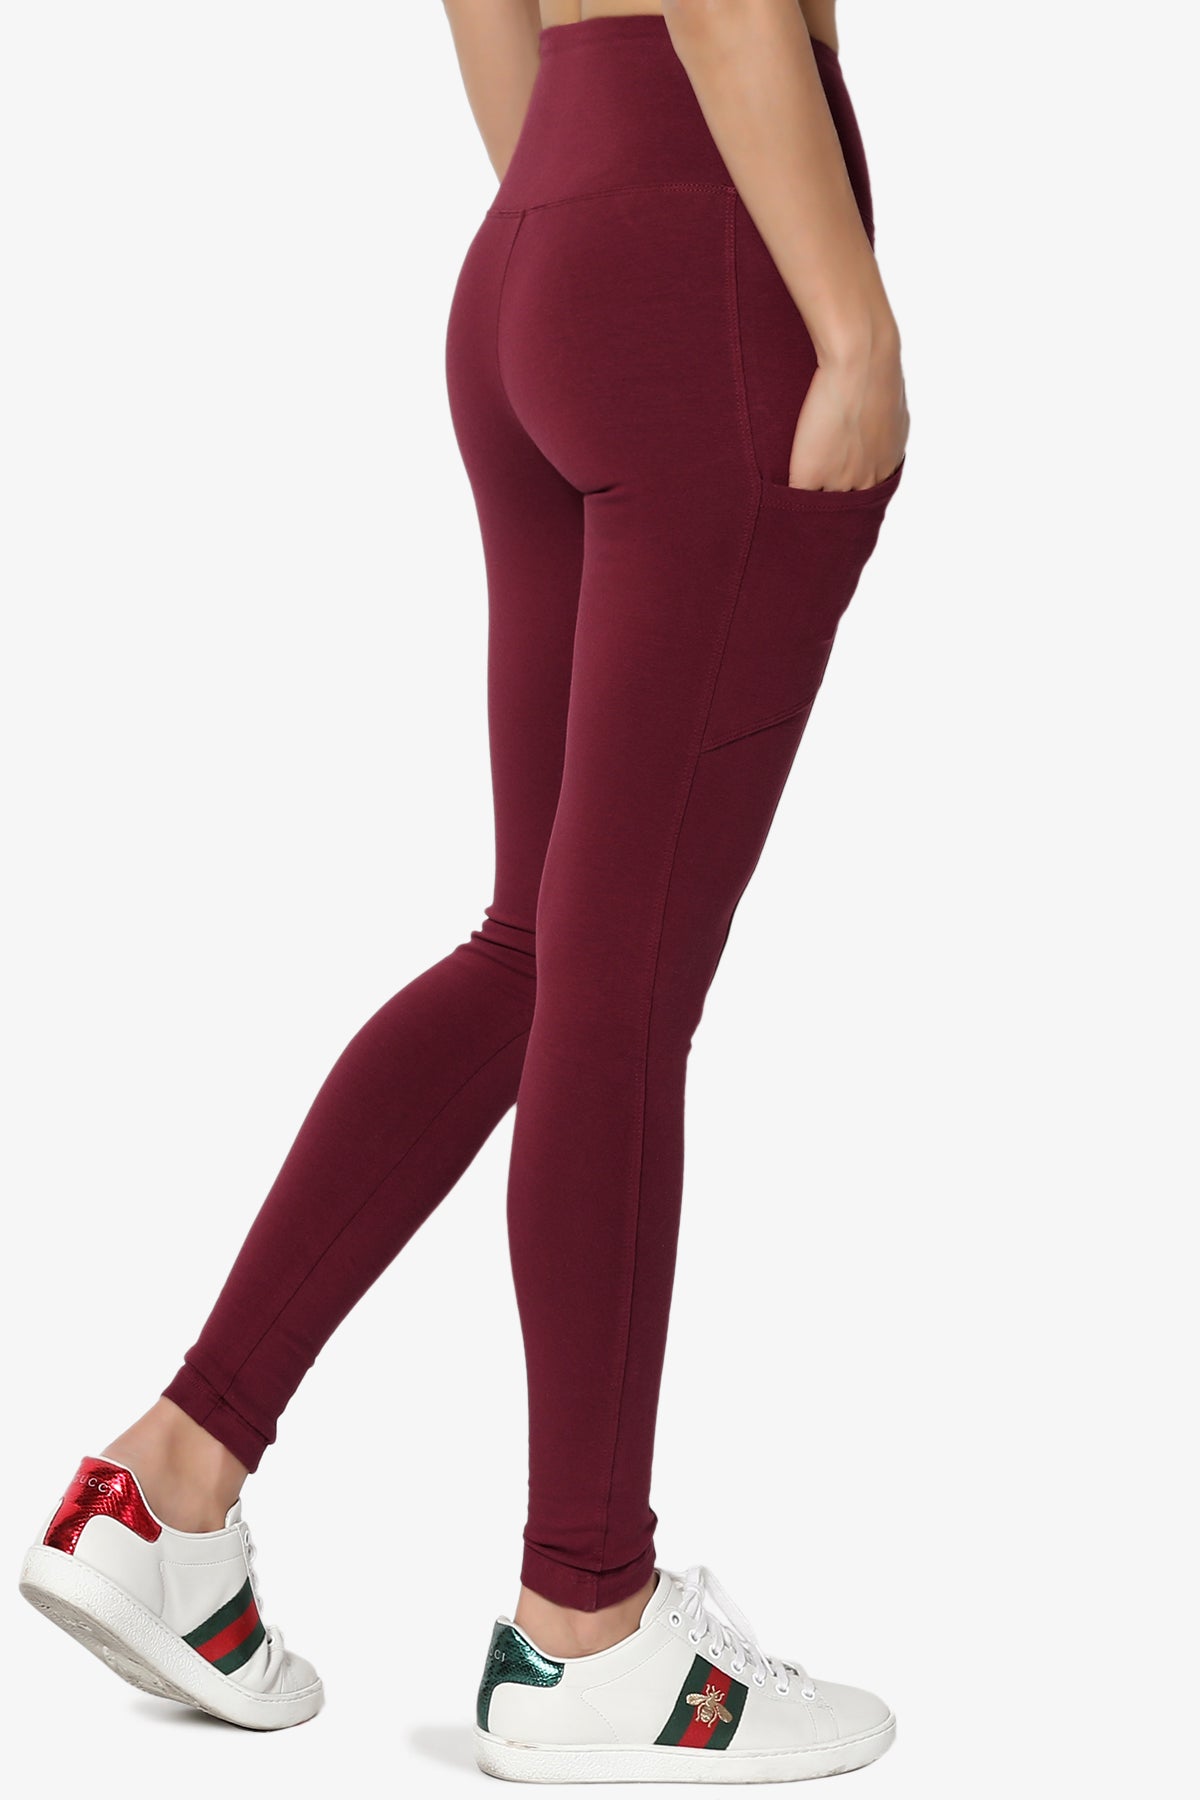 Ansley Luxe Cotton Leggings with Pockets DARK BURGUNDY_4